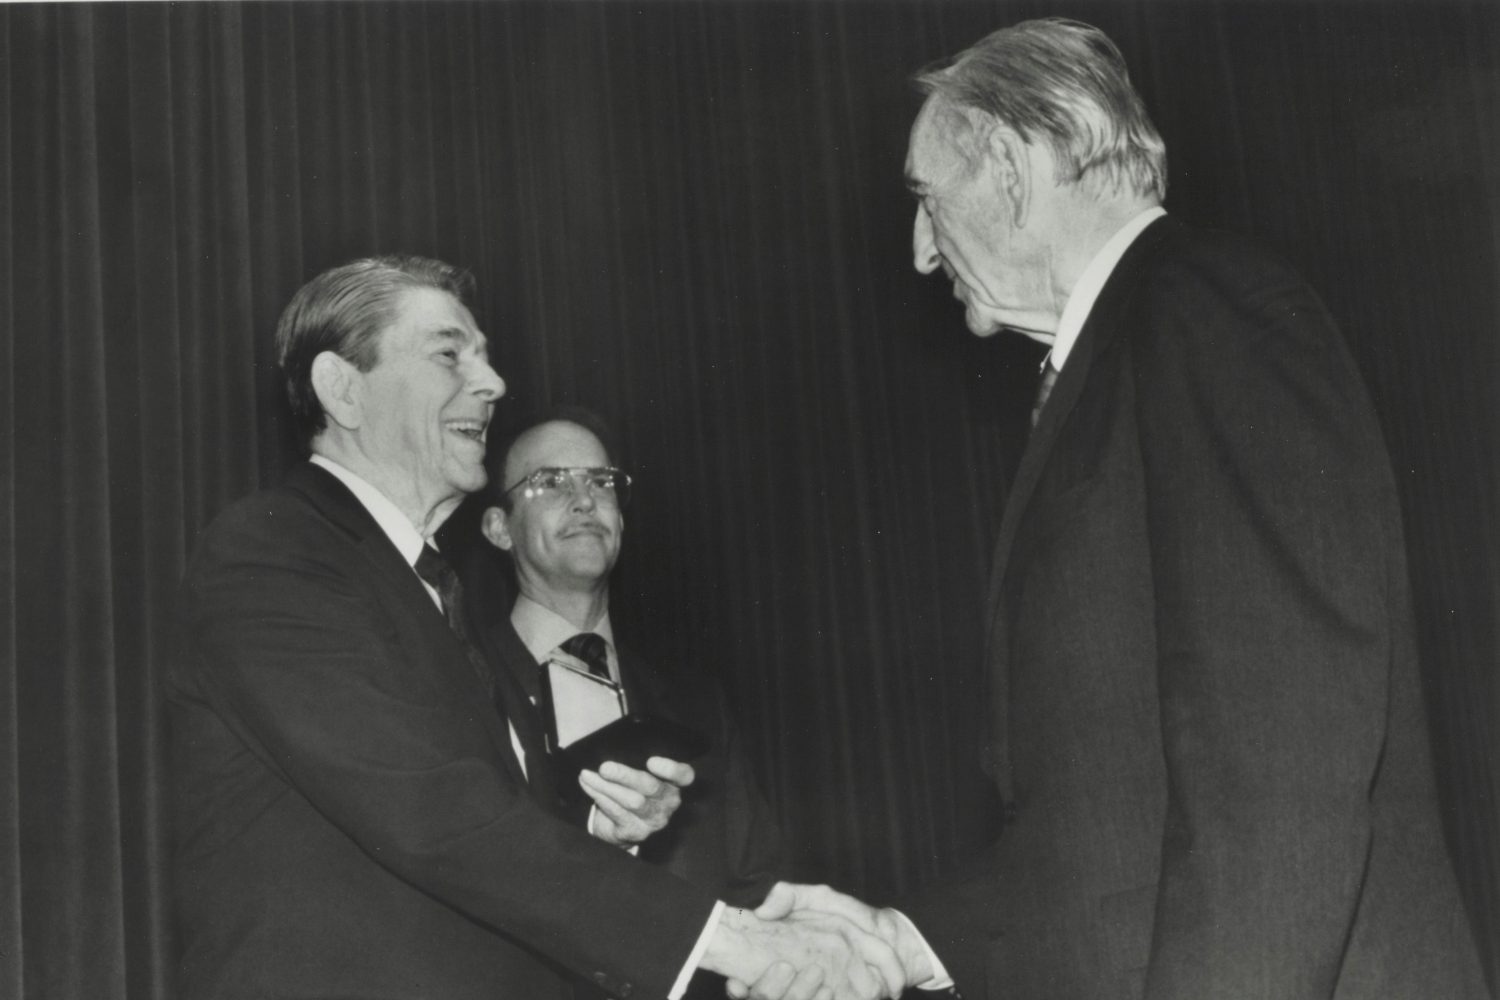 Dave Packard receives the  Medal of Freedom from President Ronald Reagan in 1988.